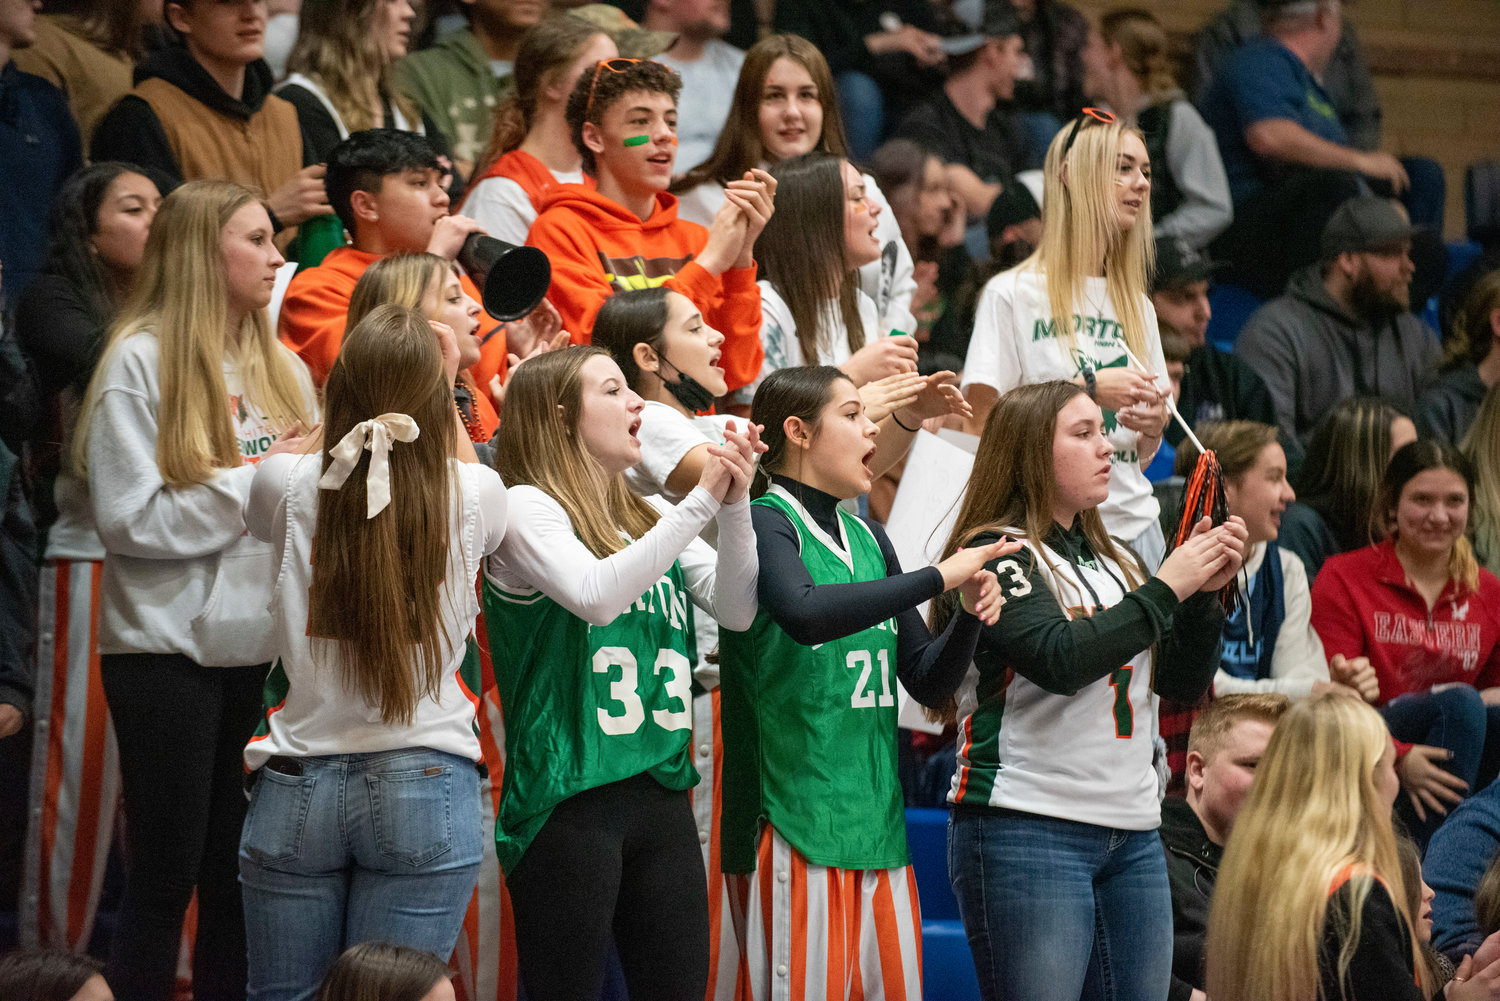 Morton-White Pass students cheer during a district semifinal game against Adna on Feb. 16.